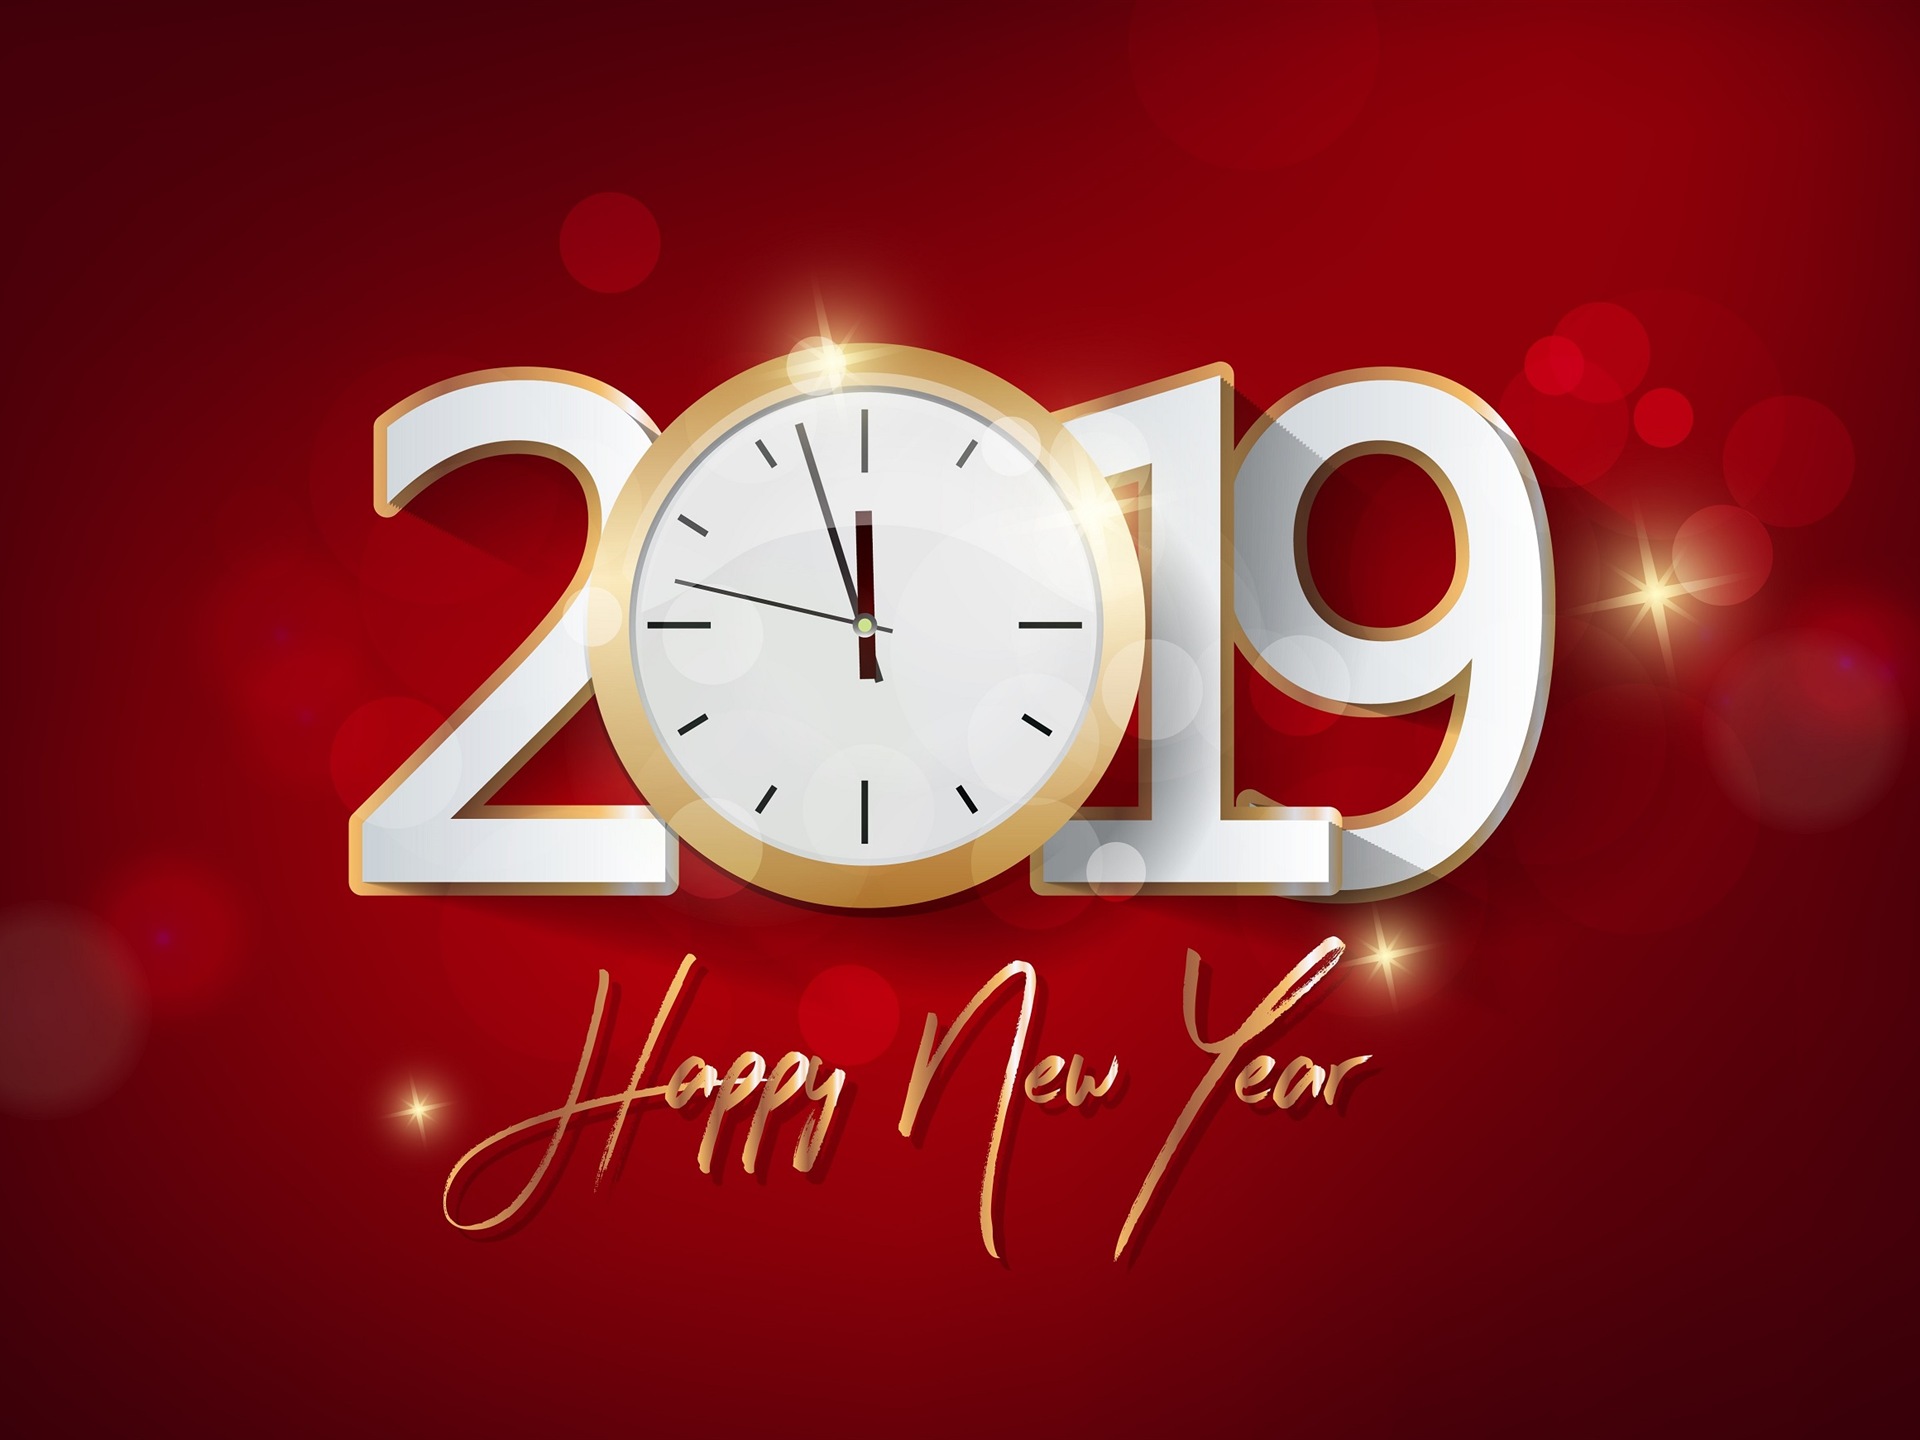 Happy New Year 2019 HD wallpapers #8 - 1920x1440